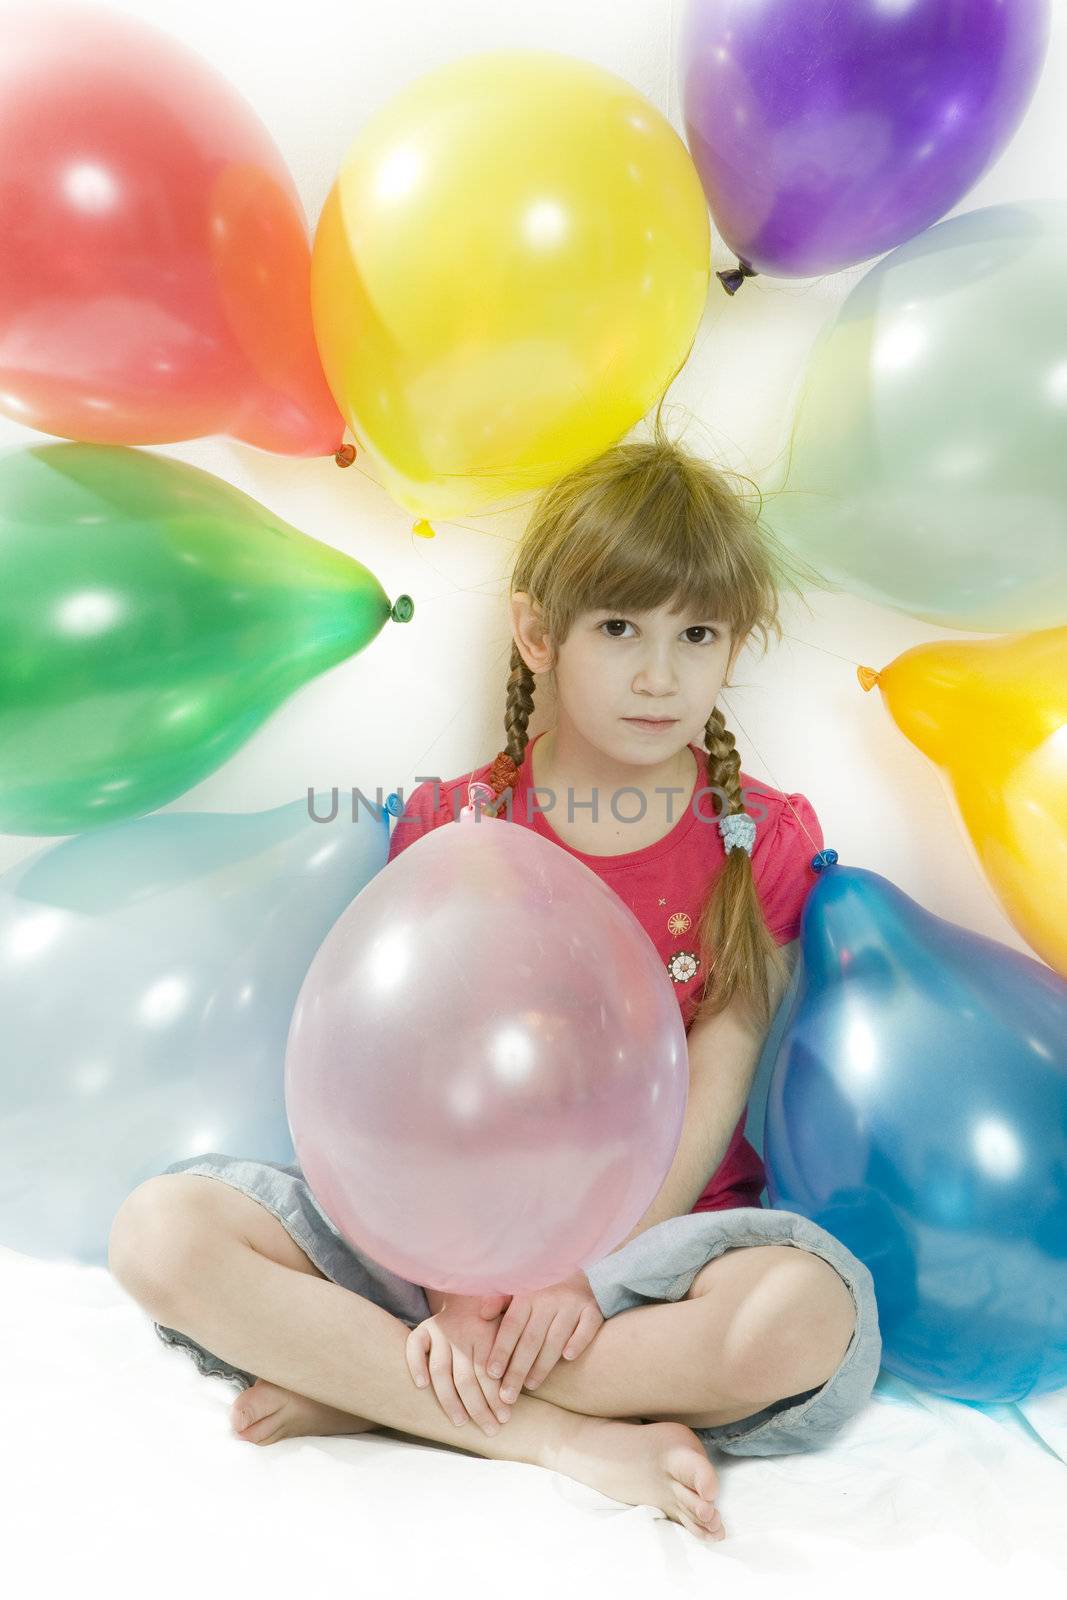 little happy giggle girl sitting with colour balloons. Girl celebrated her birthday. Isolated